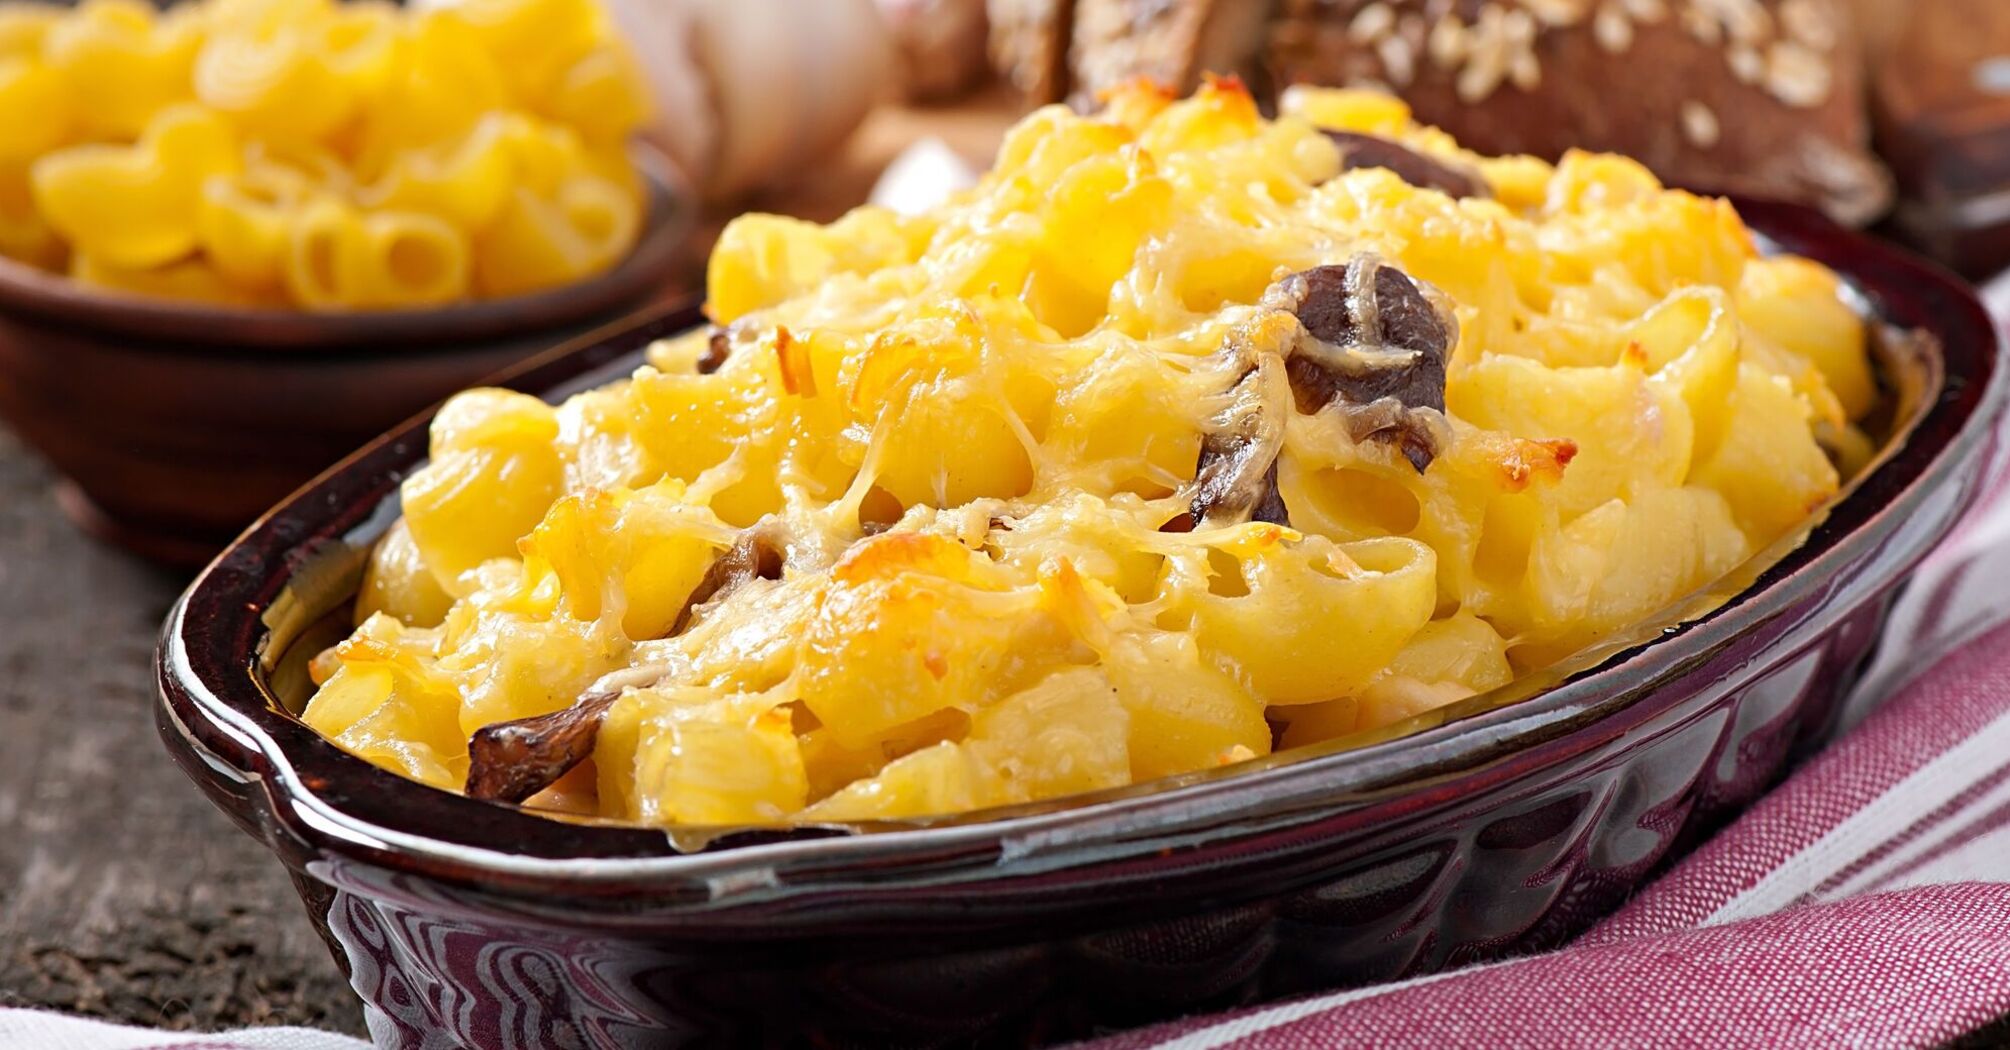 Baked young potatoes with cheese: you won't look for other recipes ever again